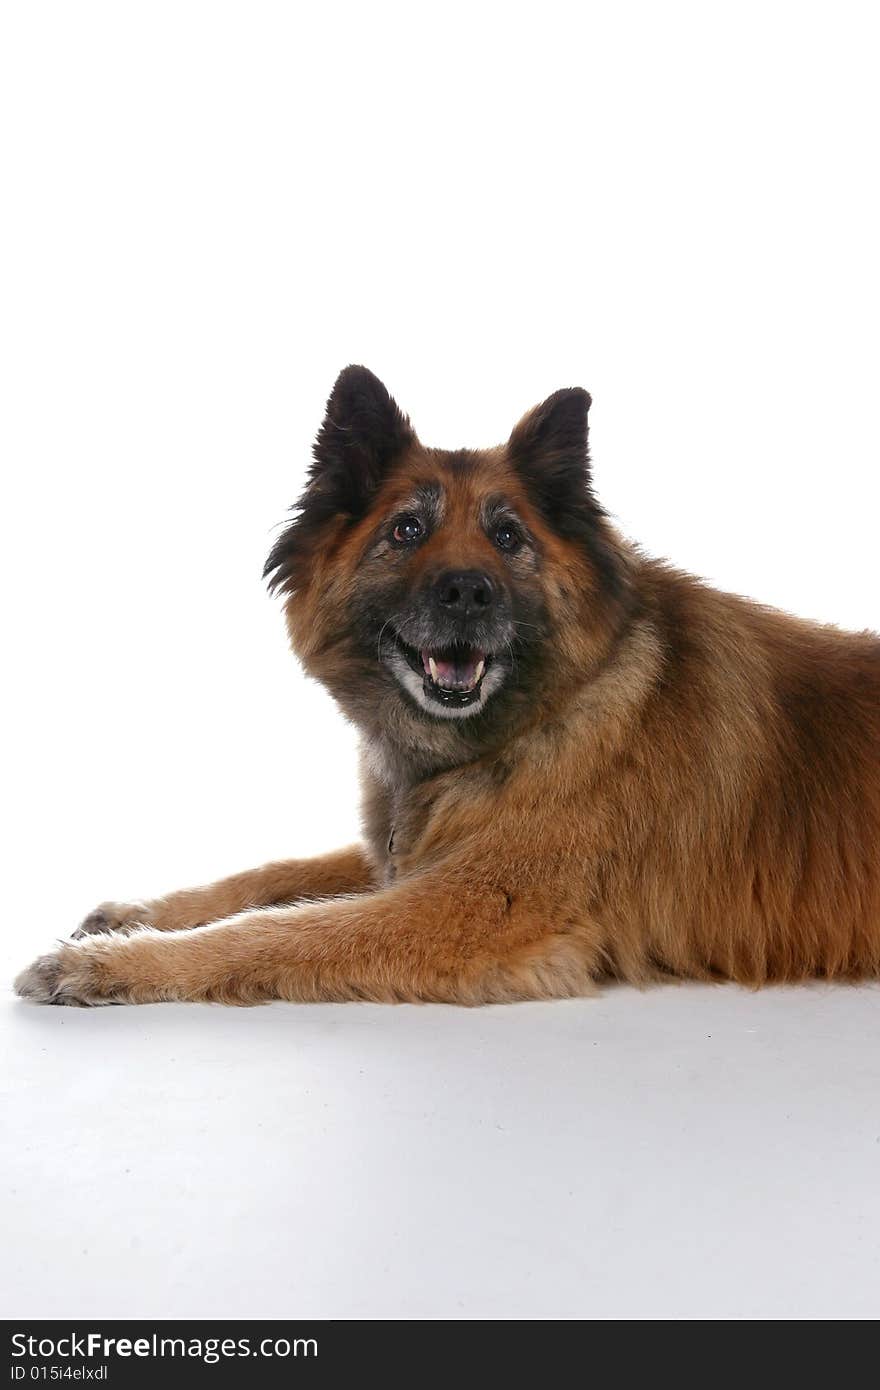 Big brown dog with pointed ears on a white background